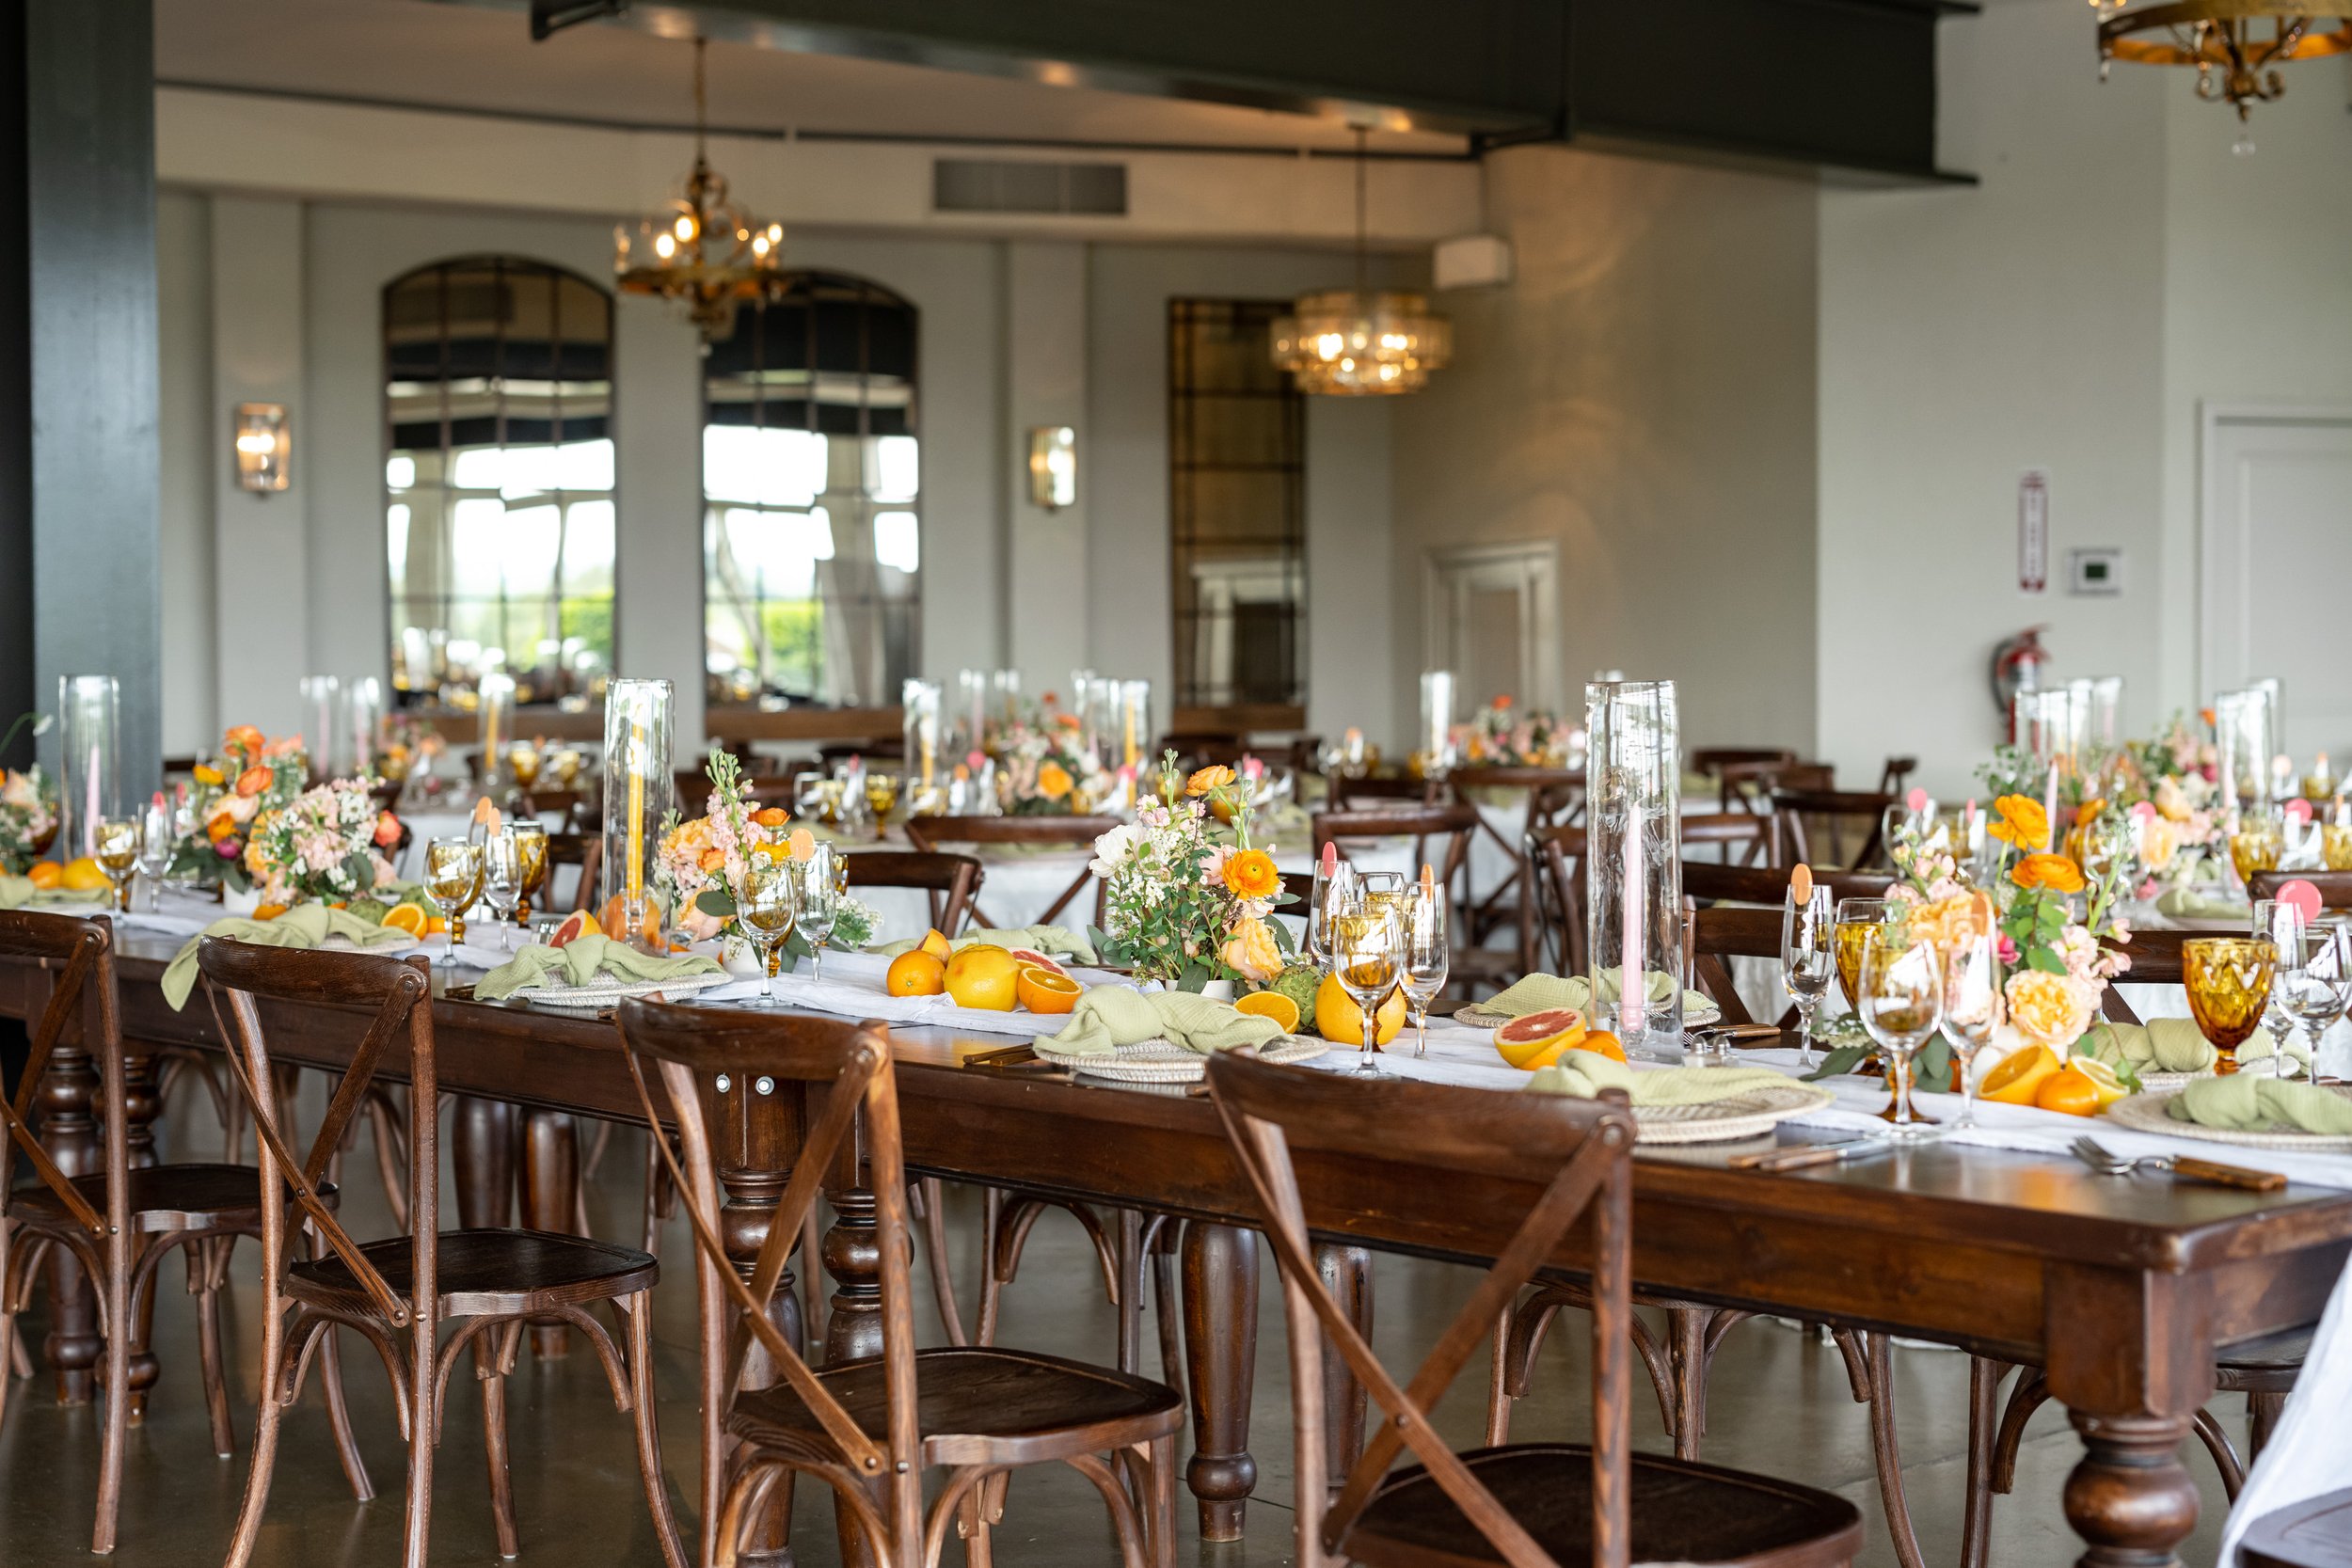 Citrus and artichoke themed wedding decor tables at Stone Tower